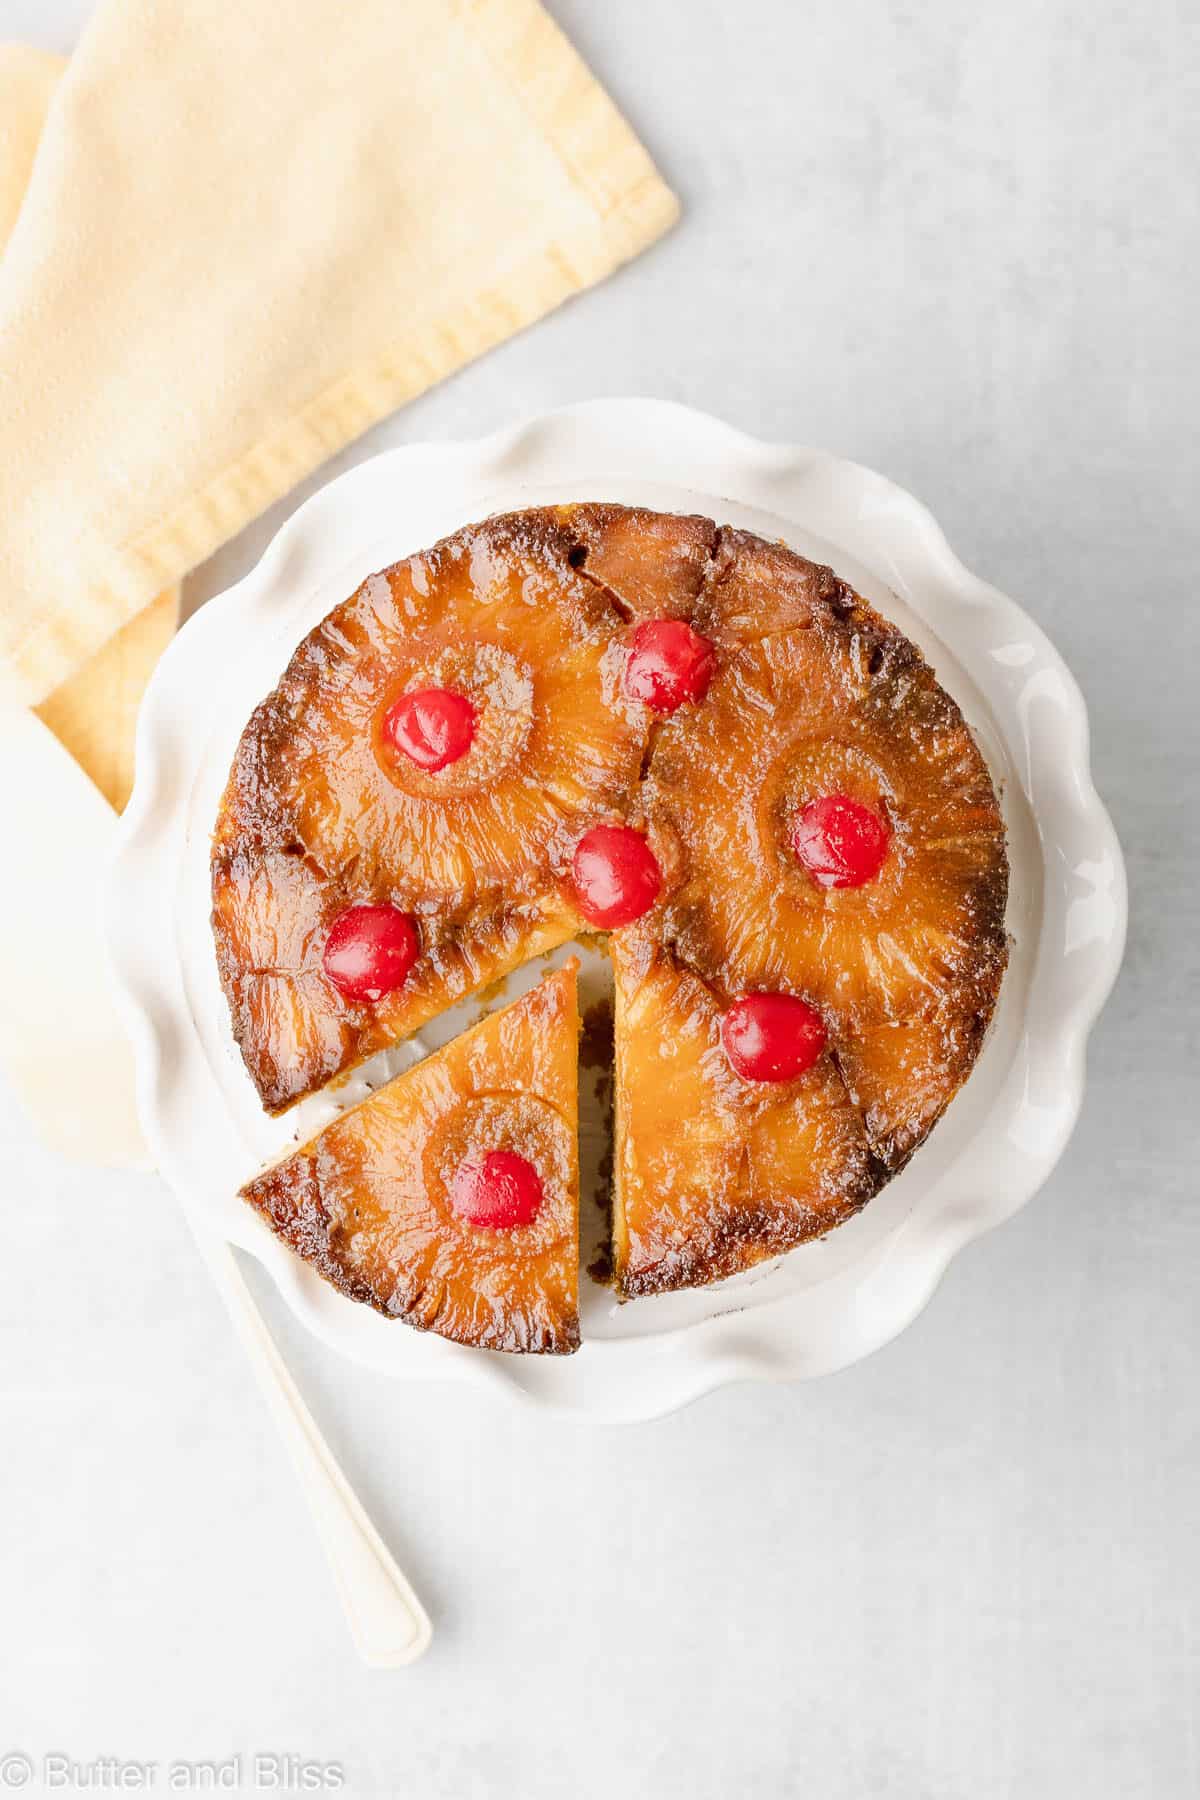 Top view of a mini pineapple upside down cake with a slice cut